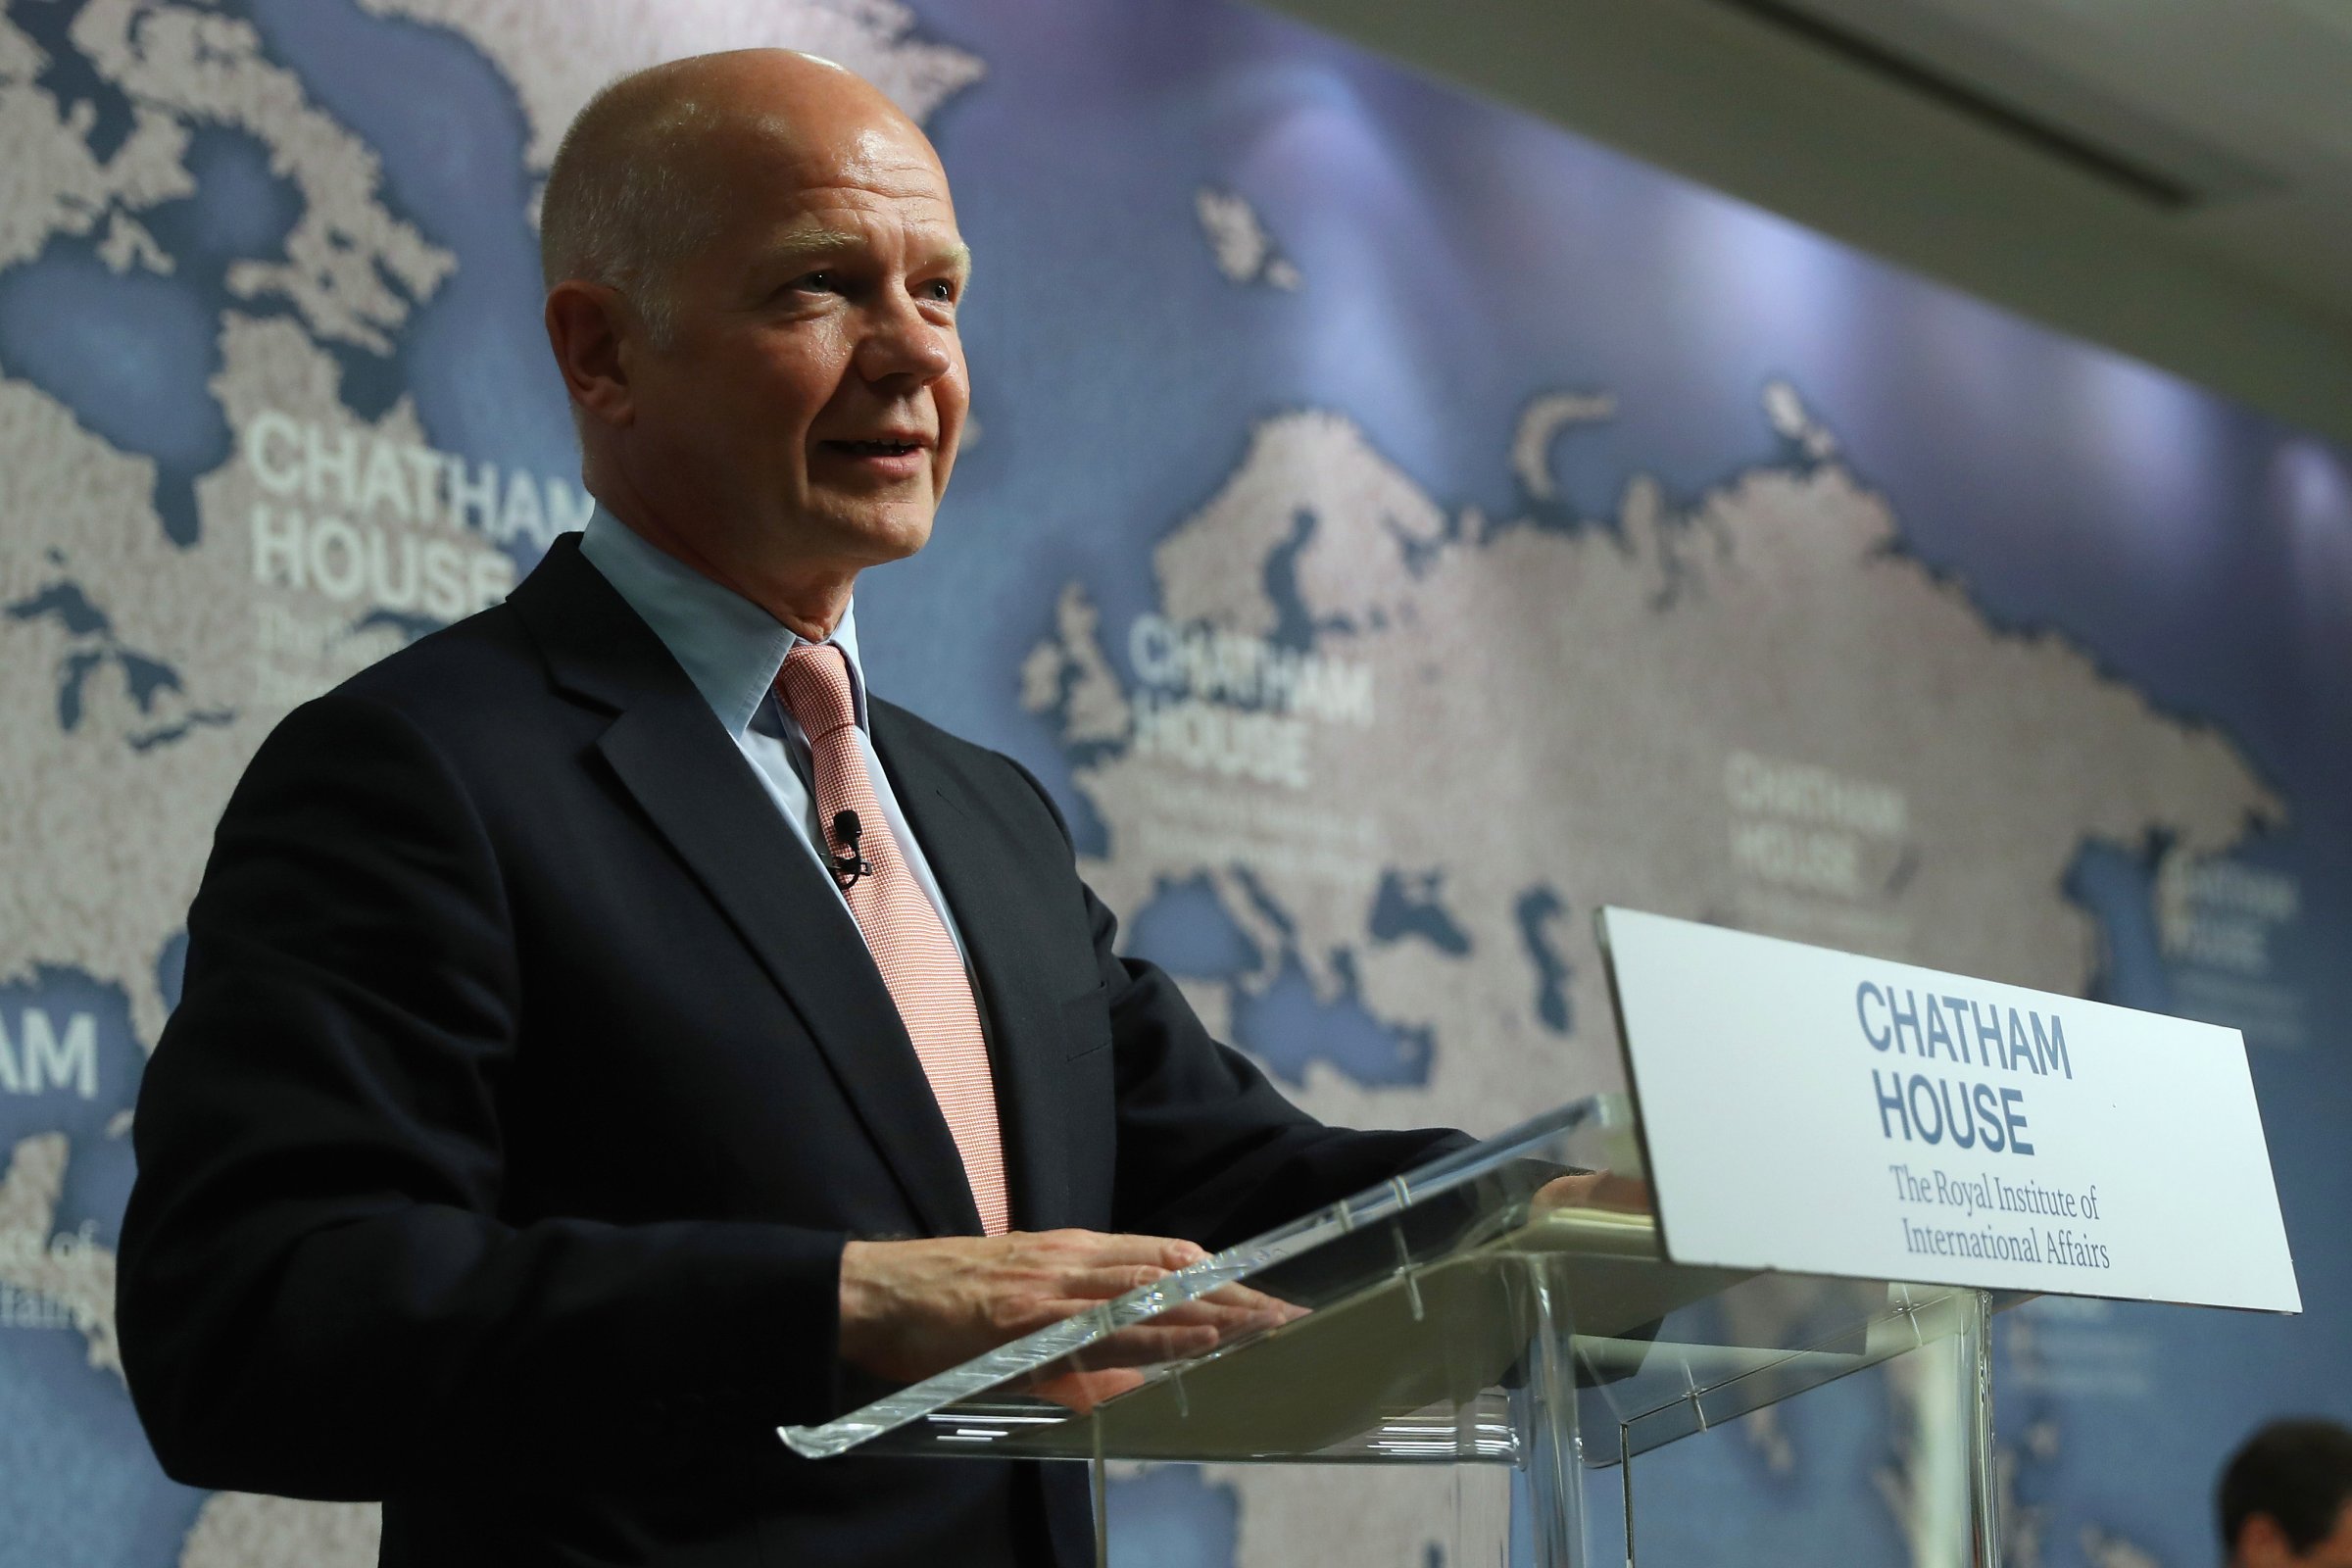 William Hague Speaks In Favour Of Remaining In The EU